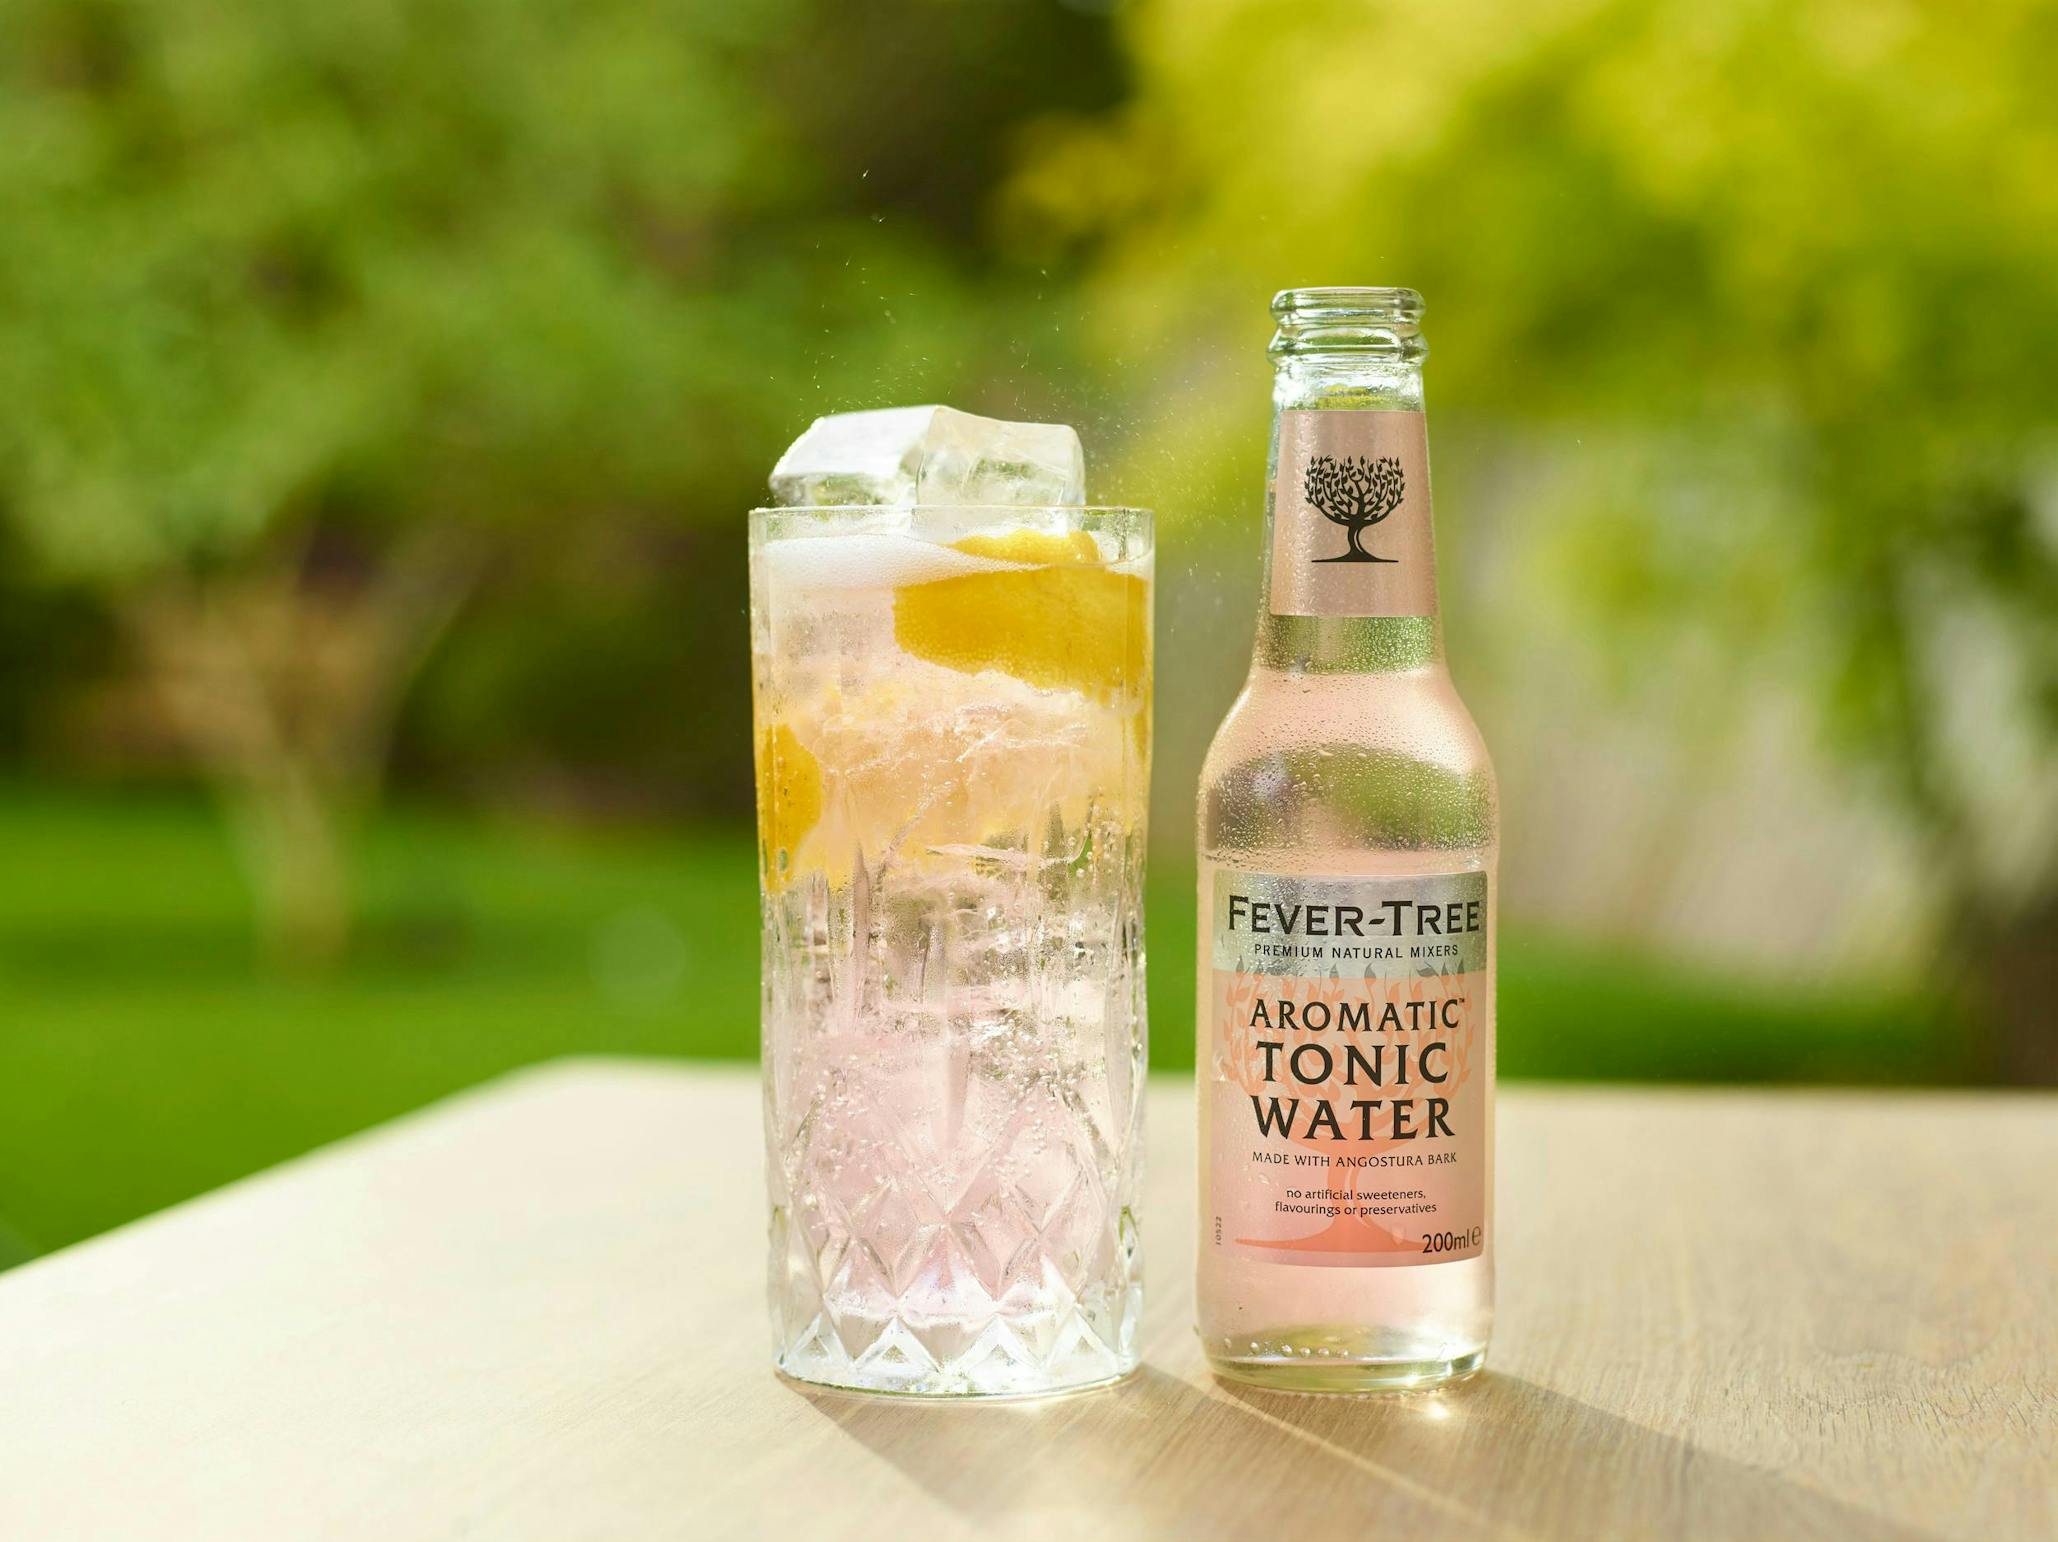 Rebel with a cause: Fever-Tree Aromatic Tonic and the fight to beat malaria